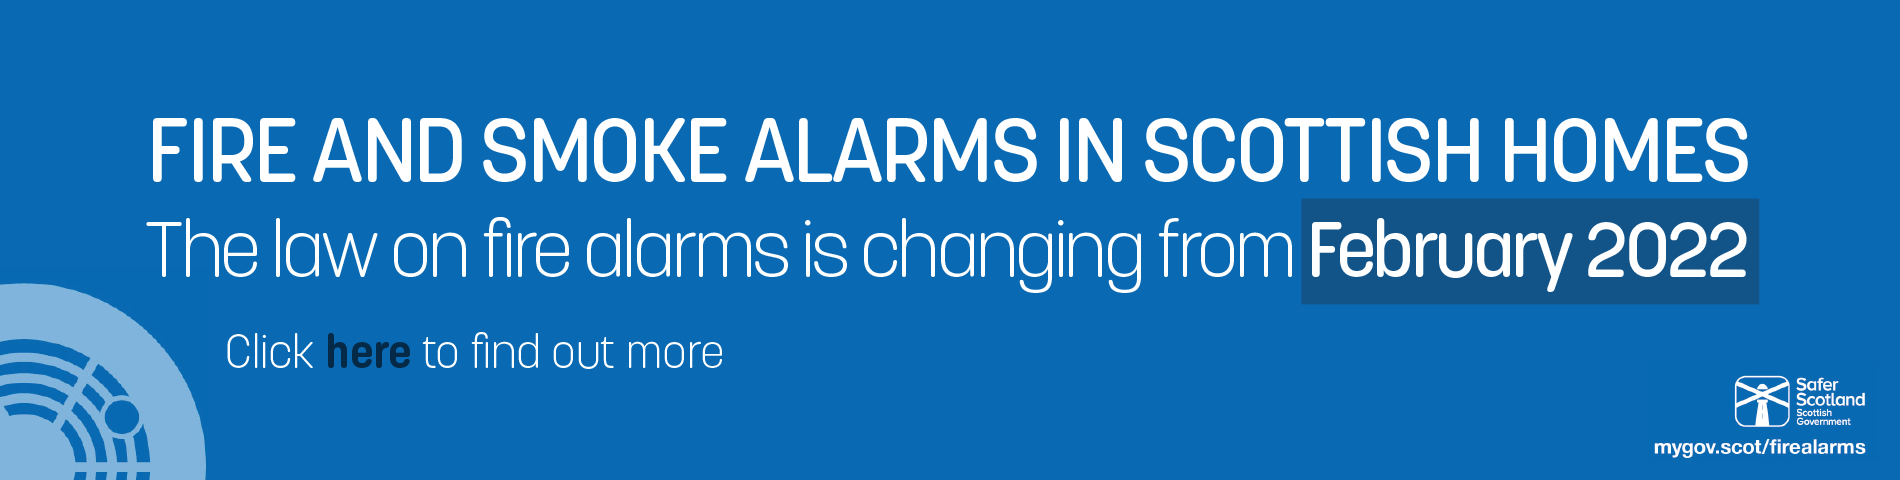 Fire and Smoke alarms in Scottish homes by Feb 2022